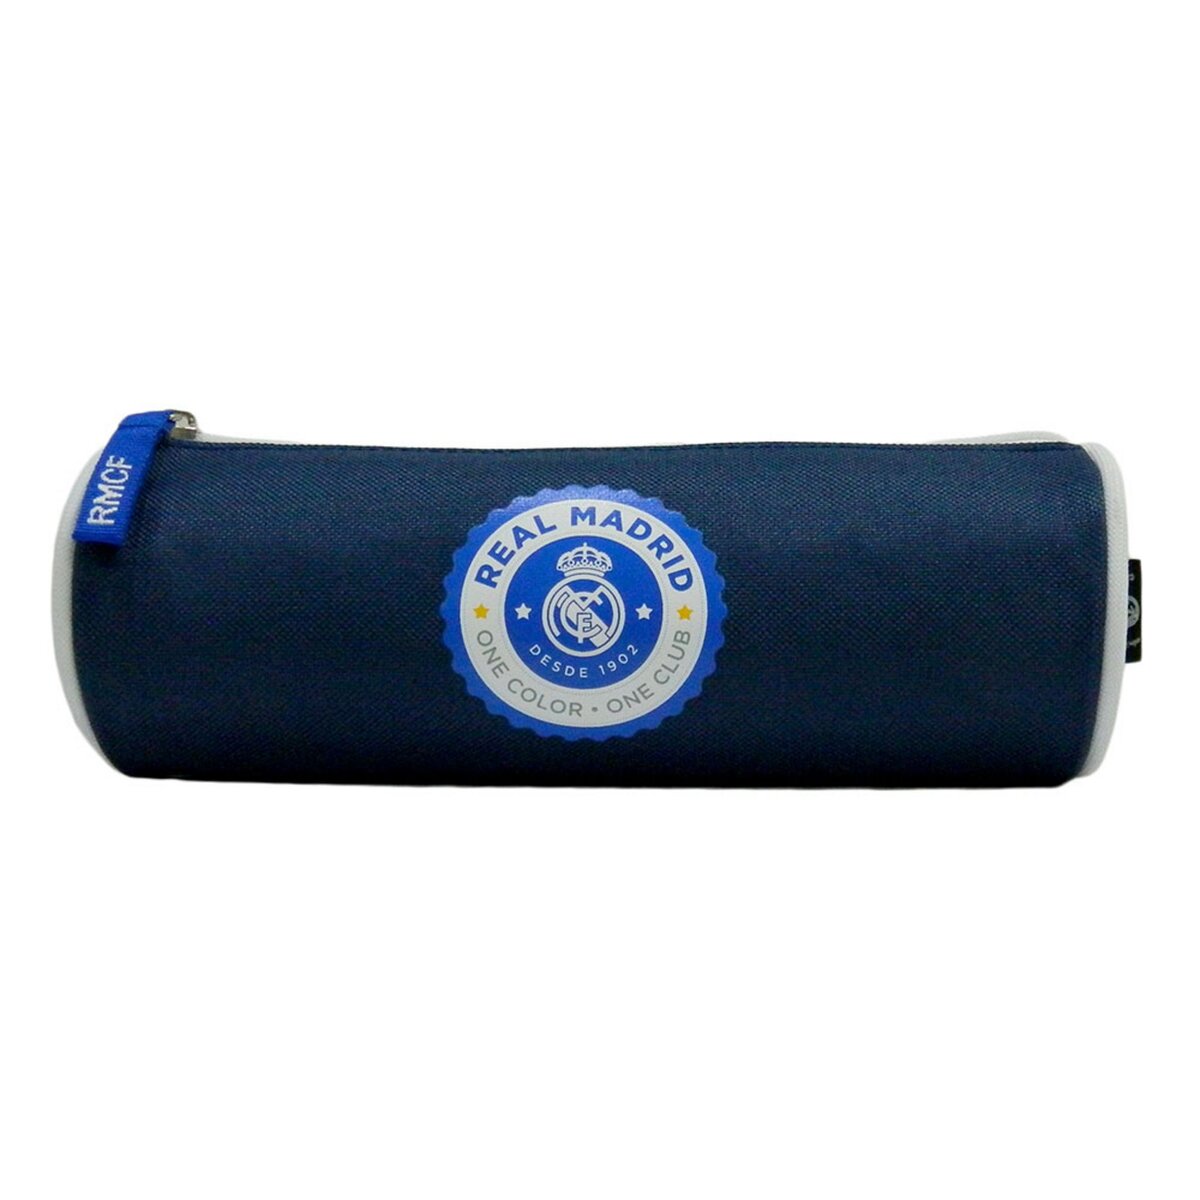 Trousse ronde bleue REAL MADRID